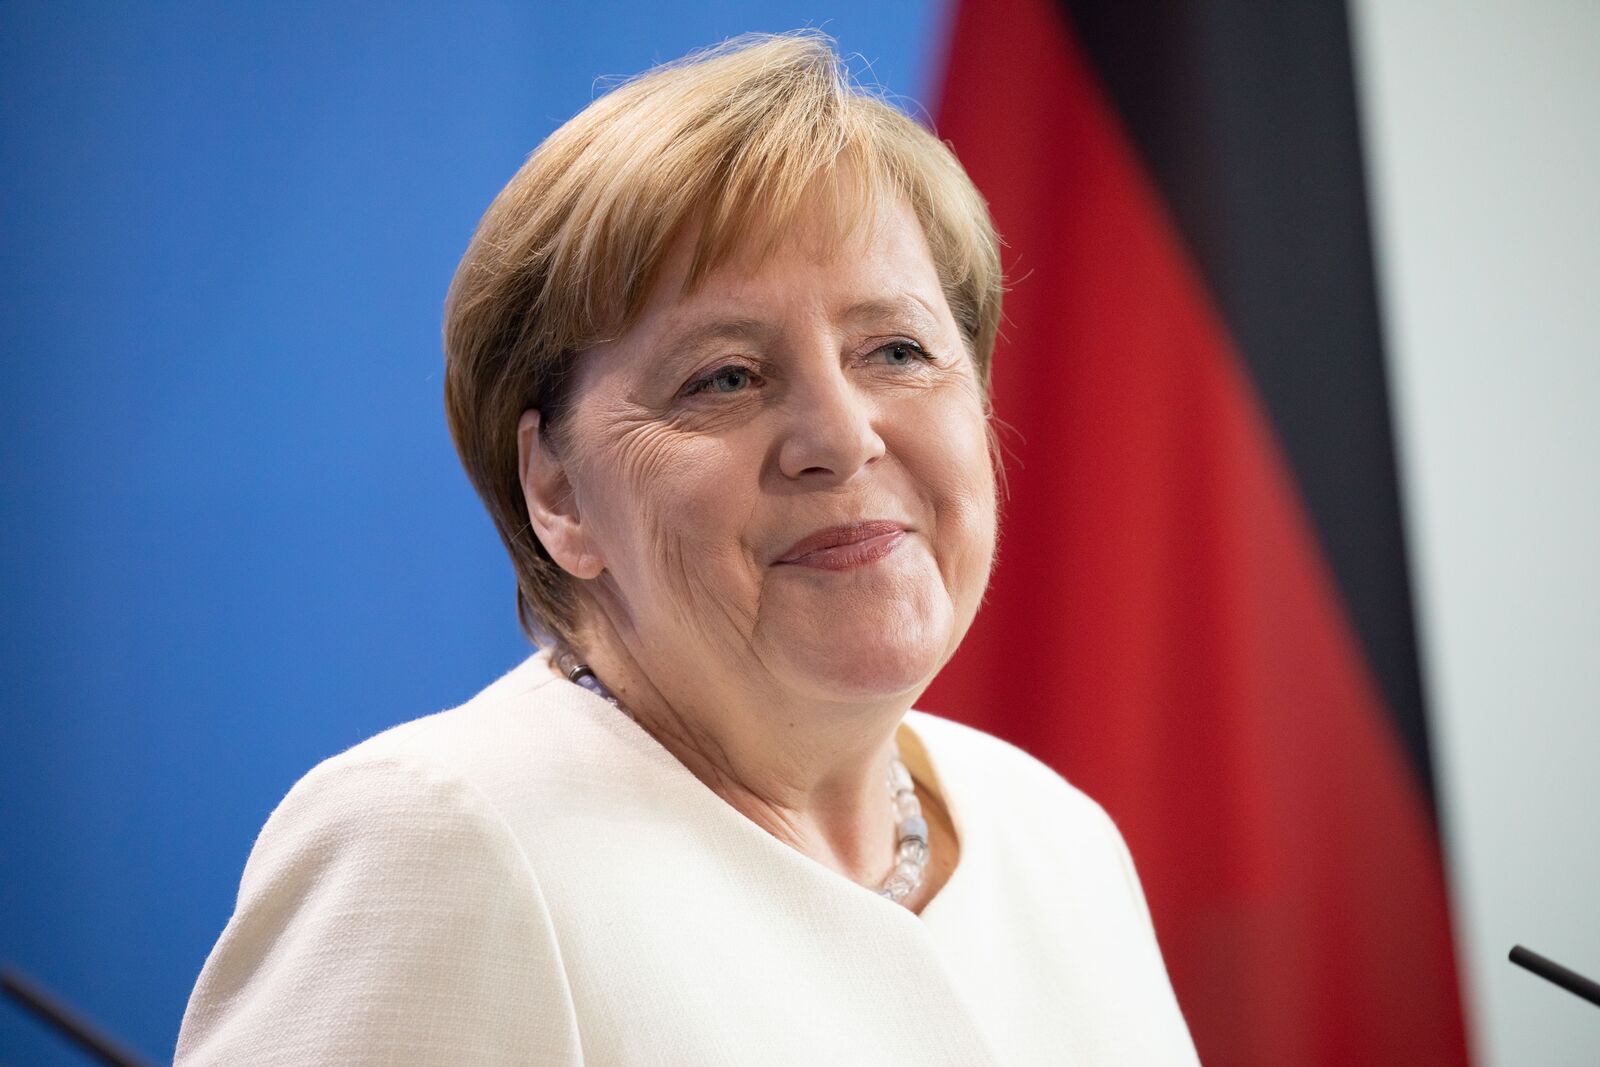 Angela Merkel Chancellor of Germany| Photo: Getty Images